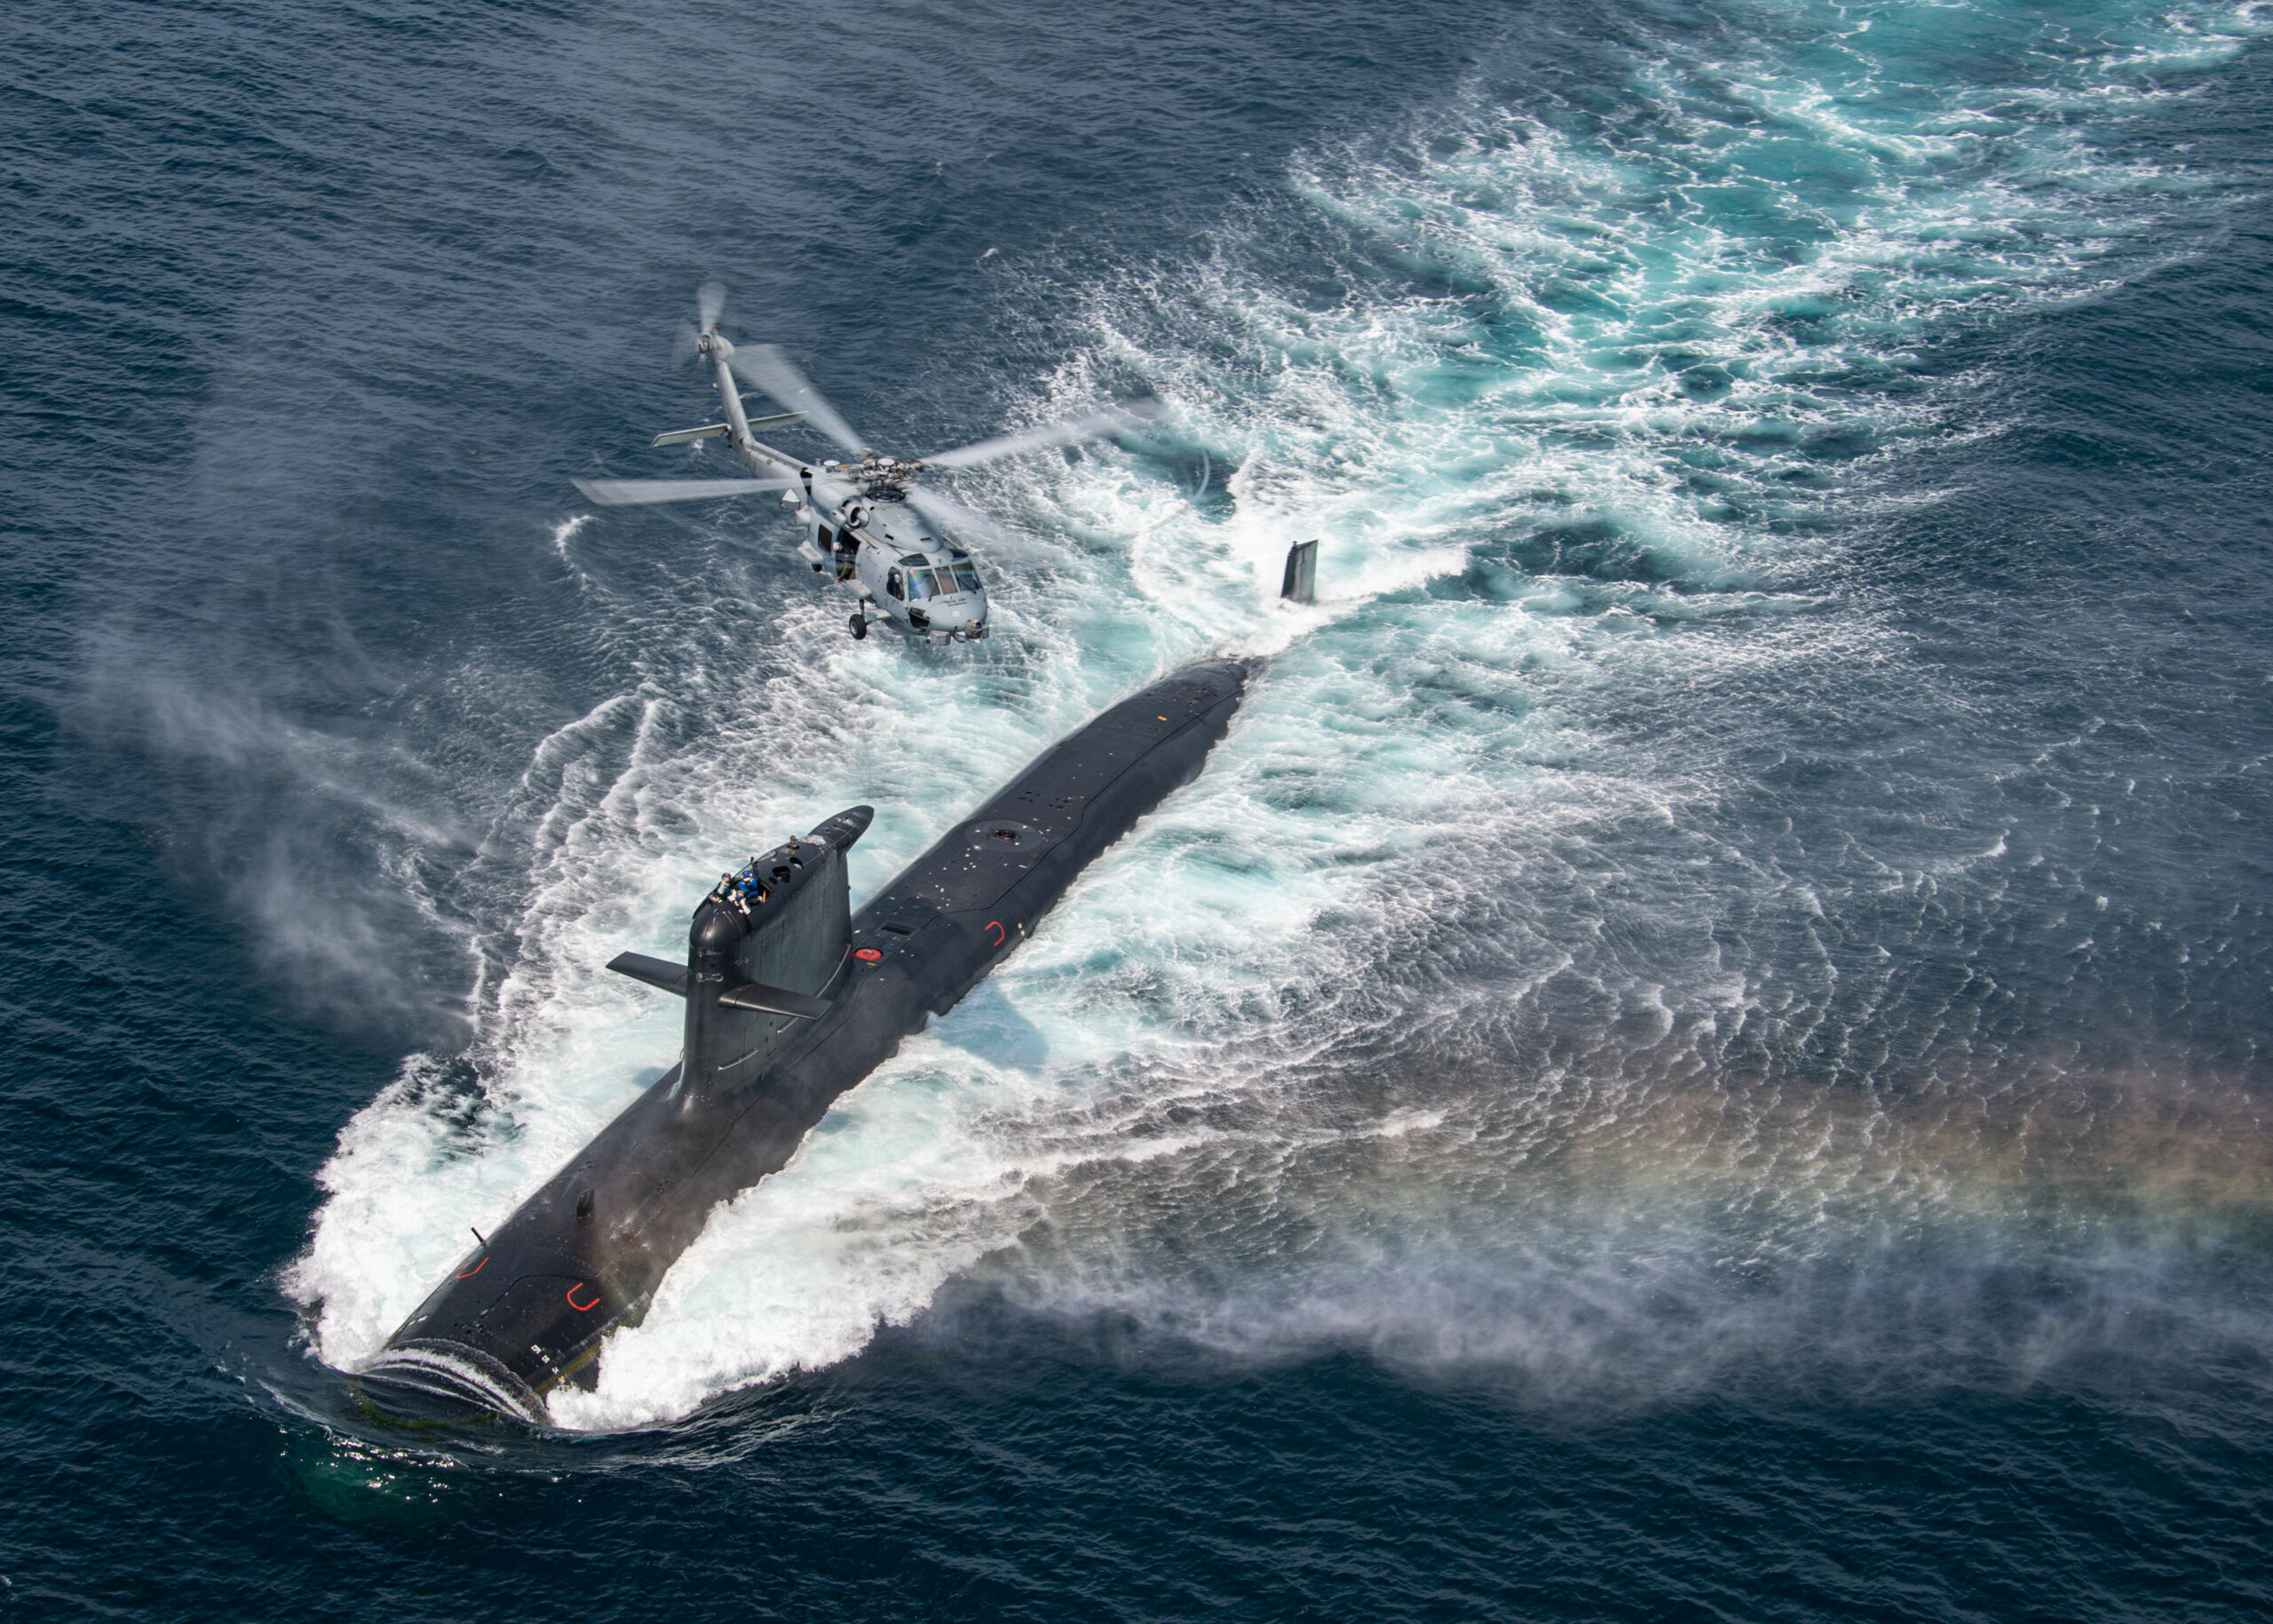 210816-N-GR718-0701 SAN DIEGO (Aug. 16, 2021) An MH-60R assigned to the “Seahawks'' of Helicopter Maritime Strike Squadron (HSM) 41 flies over a Chilean Navy Scorpene Class Submarine during Diesel-Electric Submarine Initiative Hoist Exercise 2021 (DESI HOISTEX). DESI is a multinational exercise designed to strengthen partnerships and enhance capabilities among partner nations. (U.S. Navy Photo by Mass Communication Specialist 2nd Class Chelsea D. Meiller)